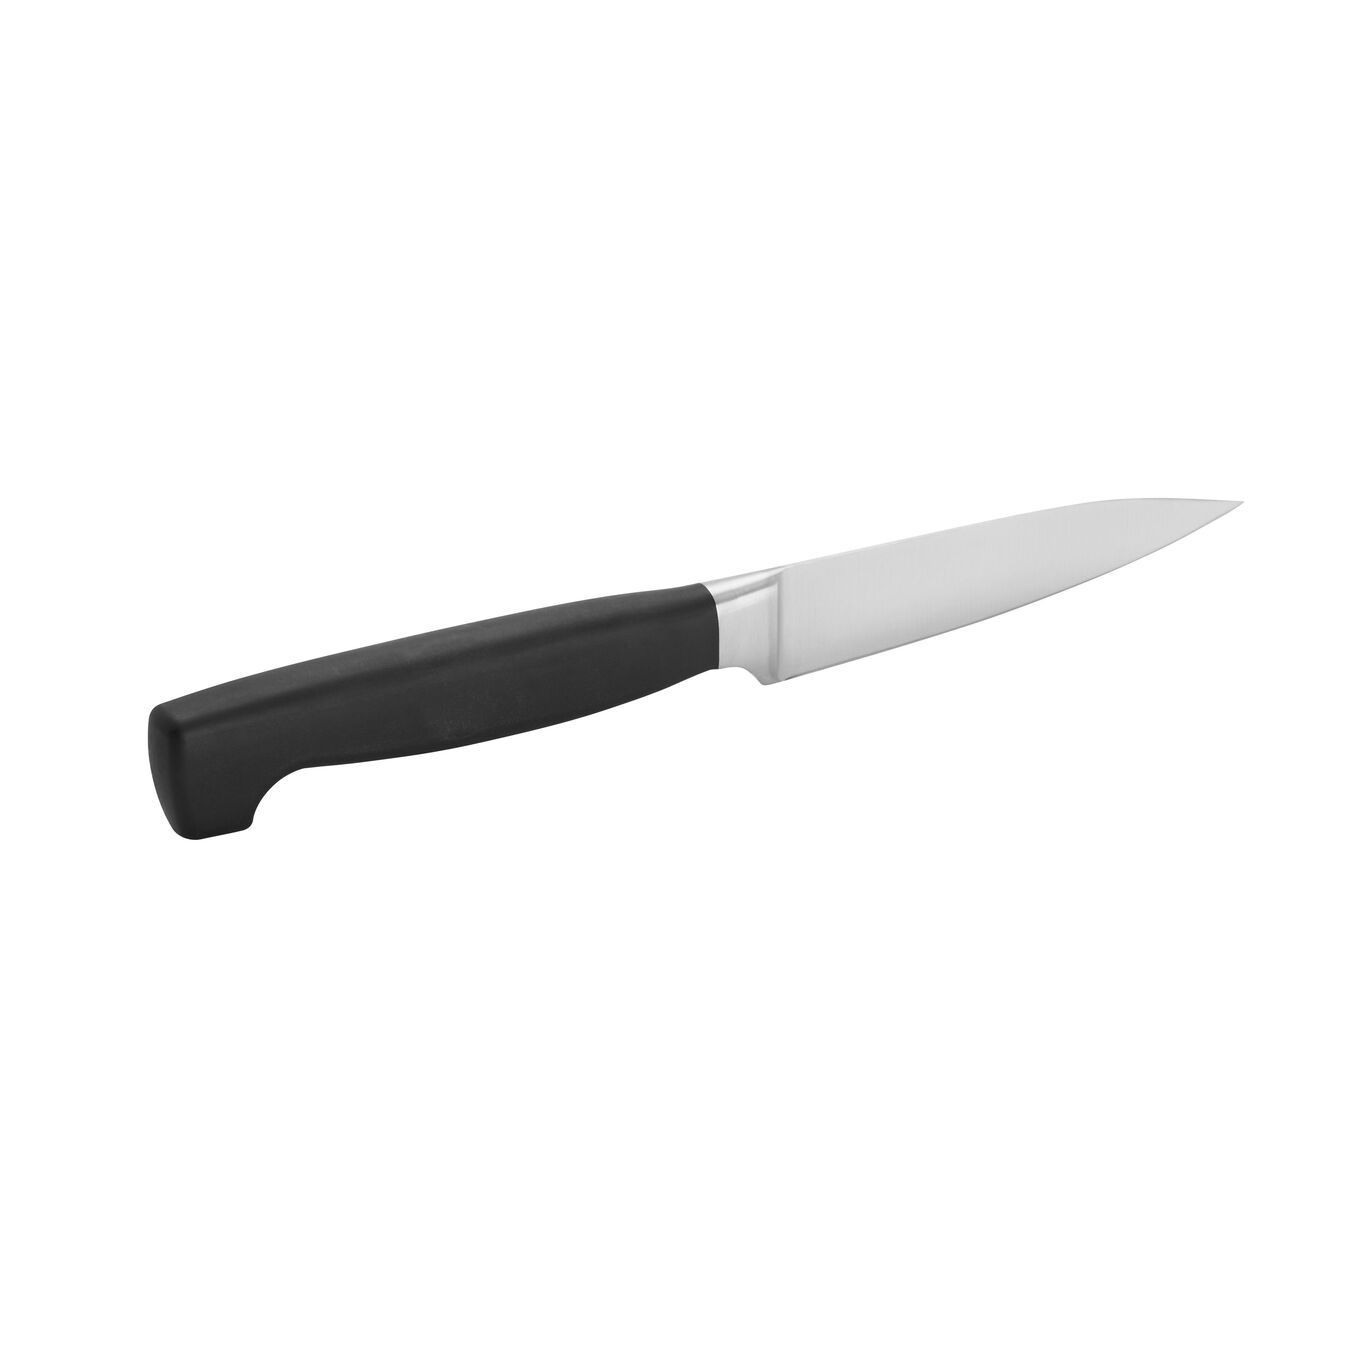 4 inch Paring knife,,large 4